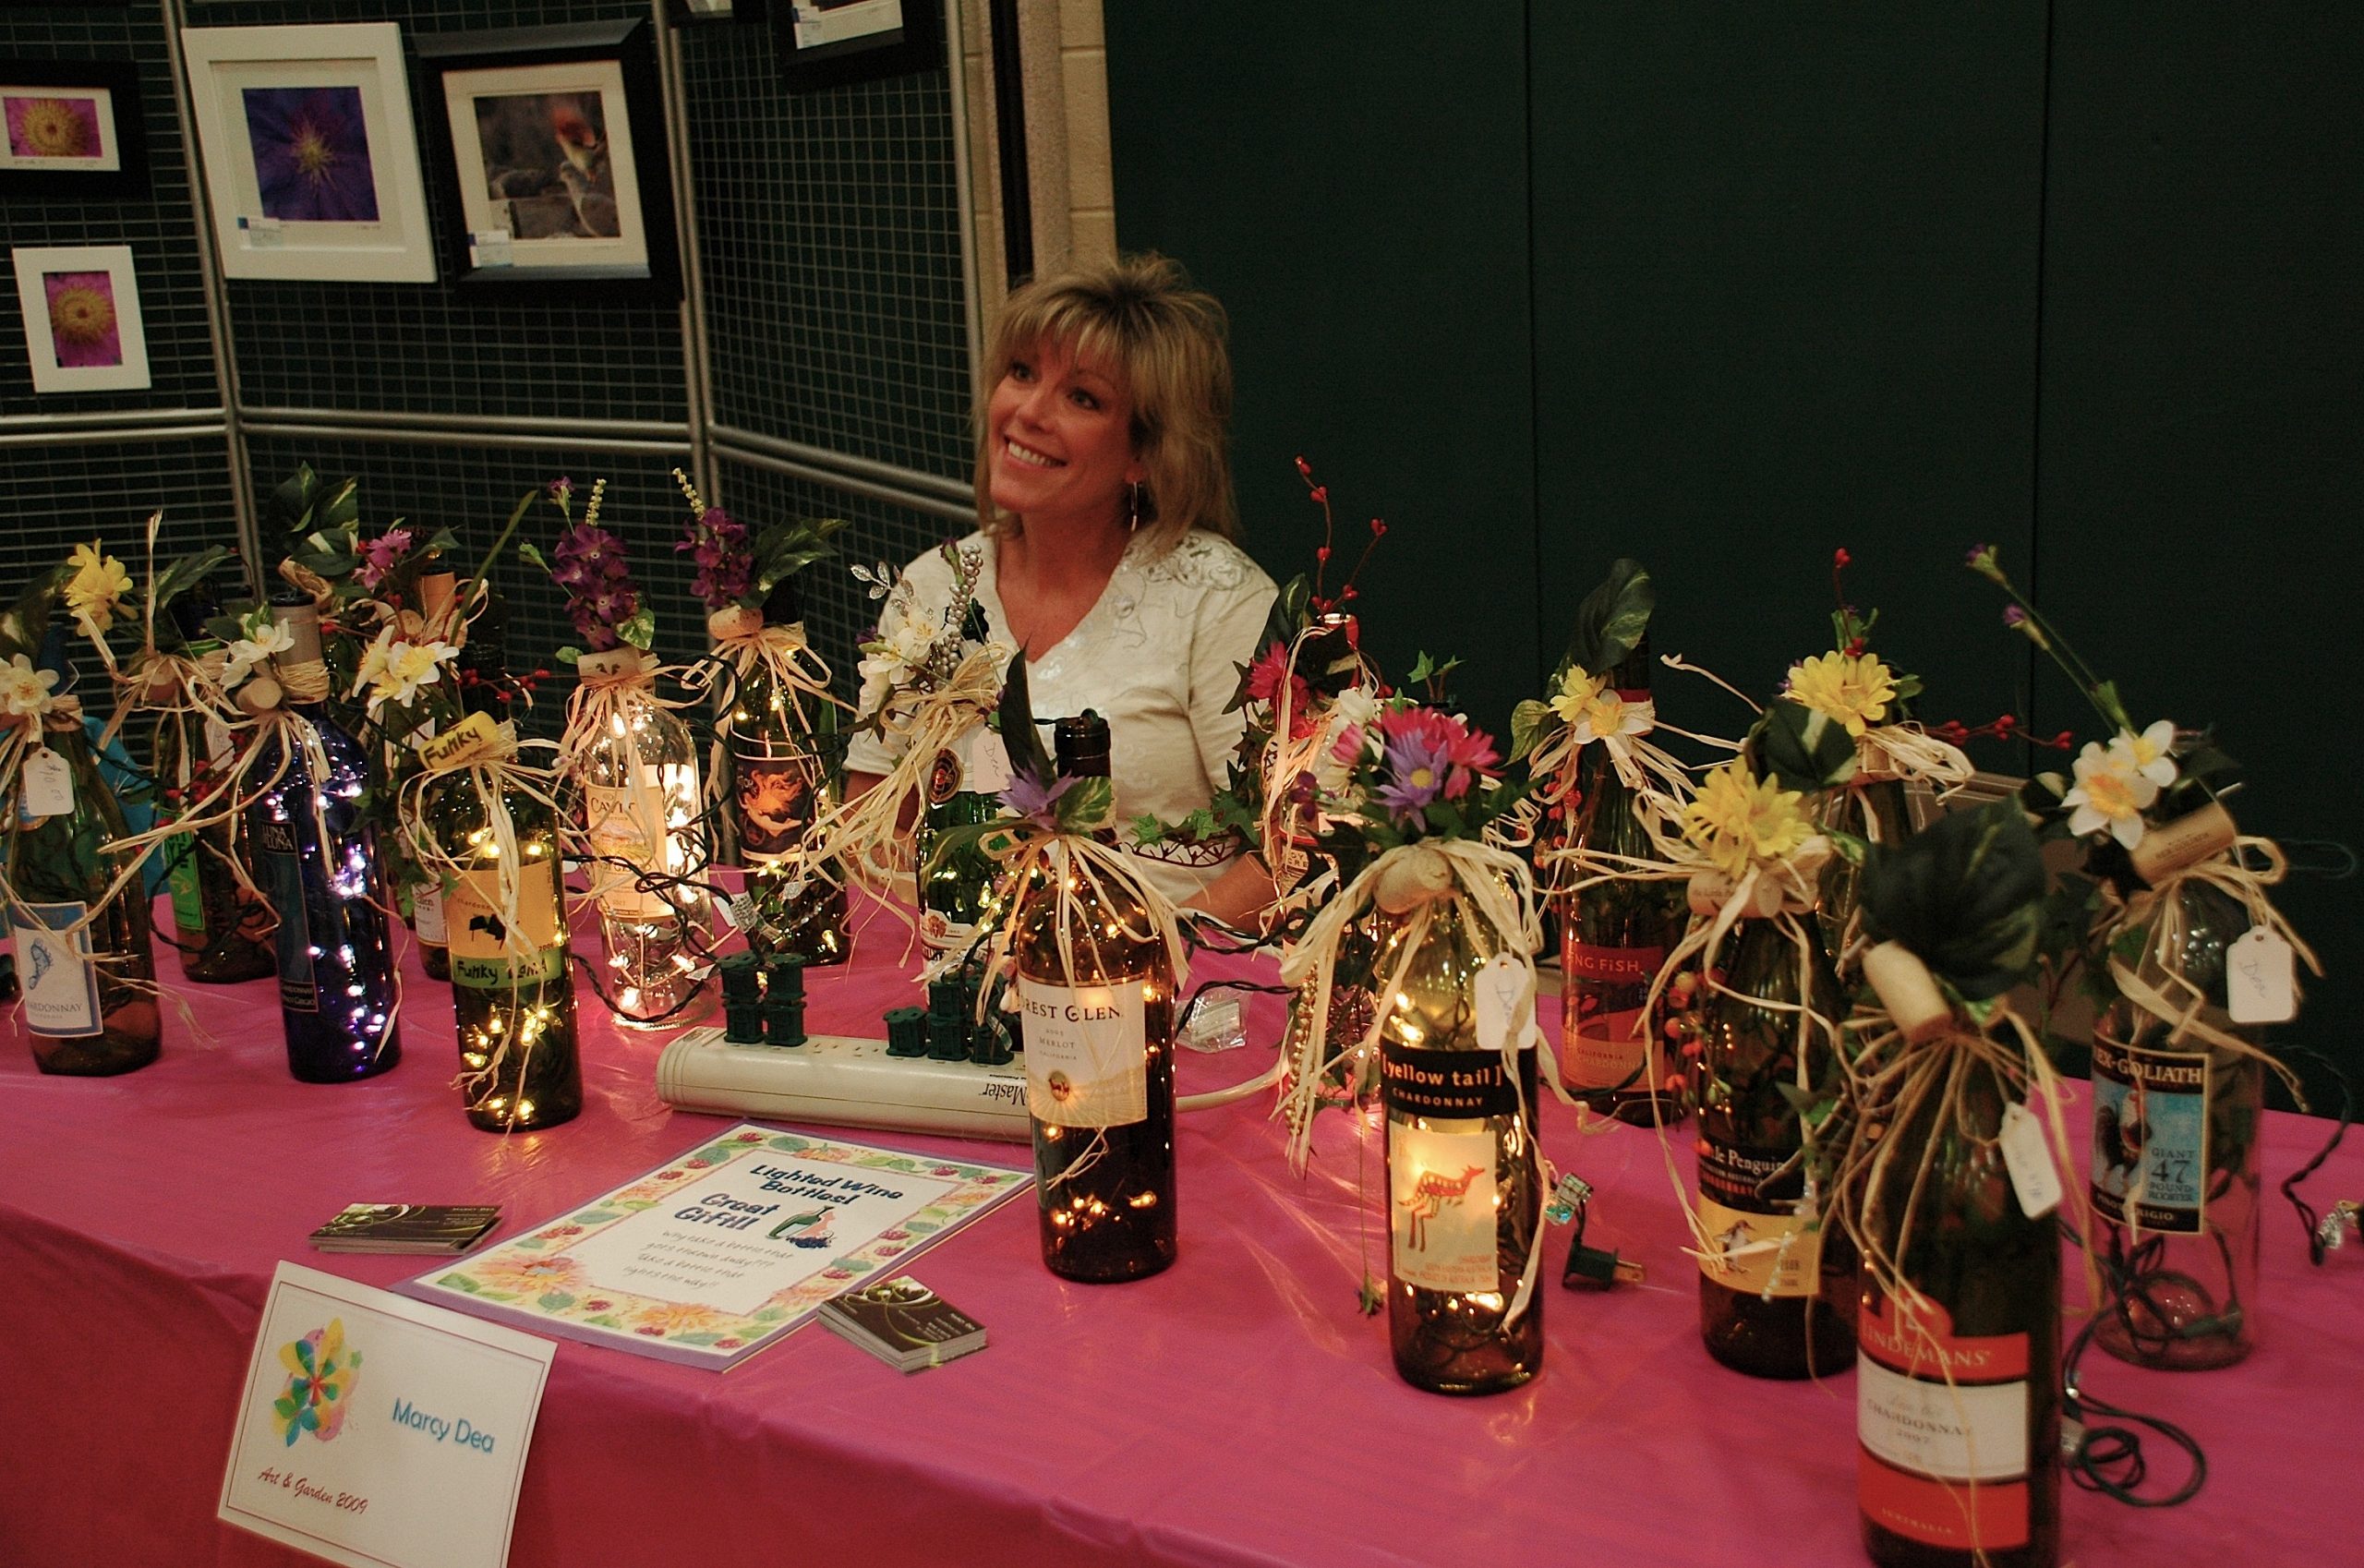 You are currently viewing Pocopson Elementary School holds Art & Garden Show and Sale